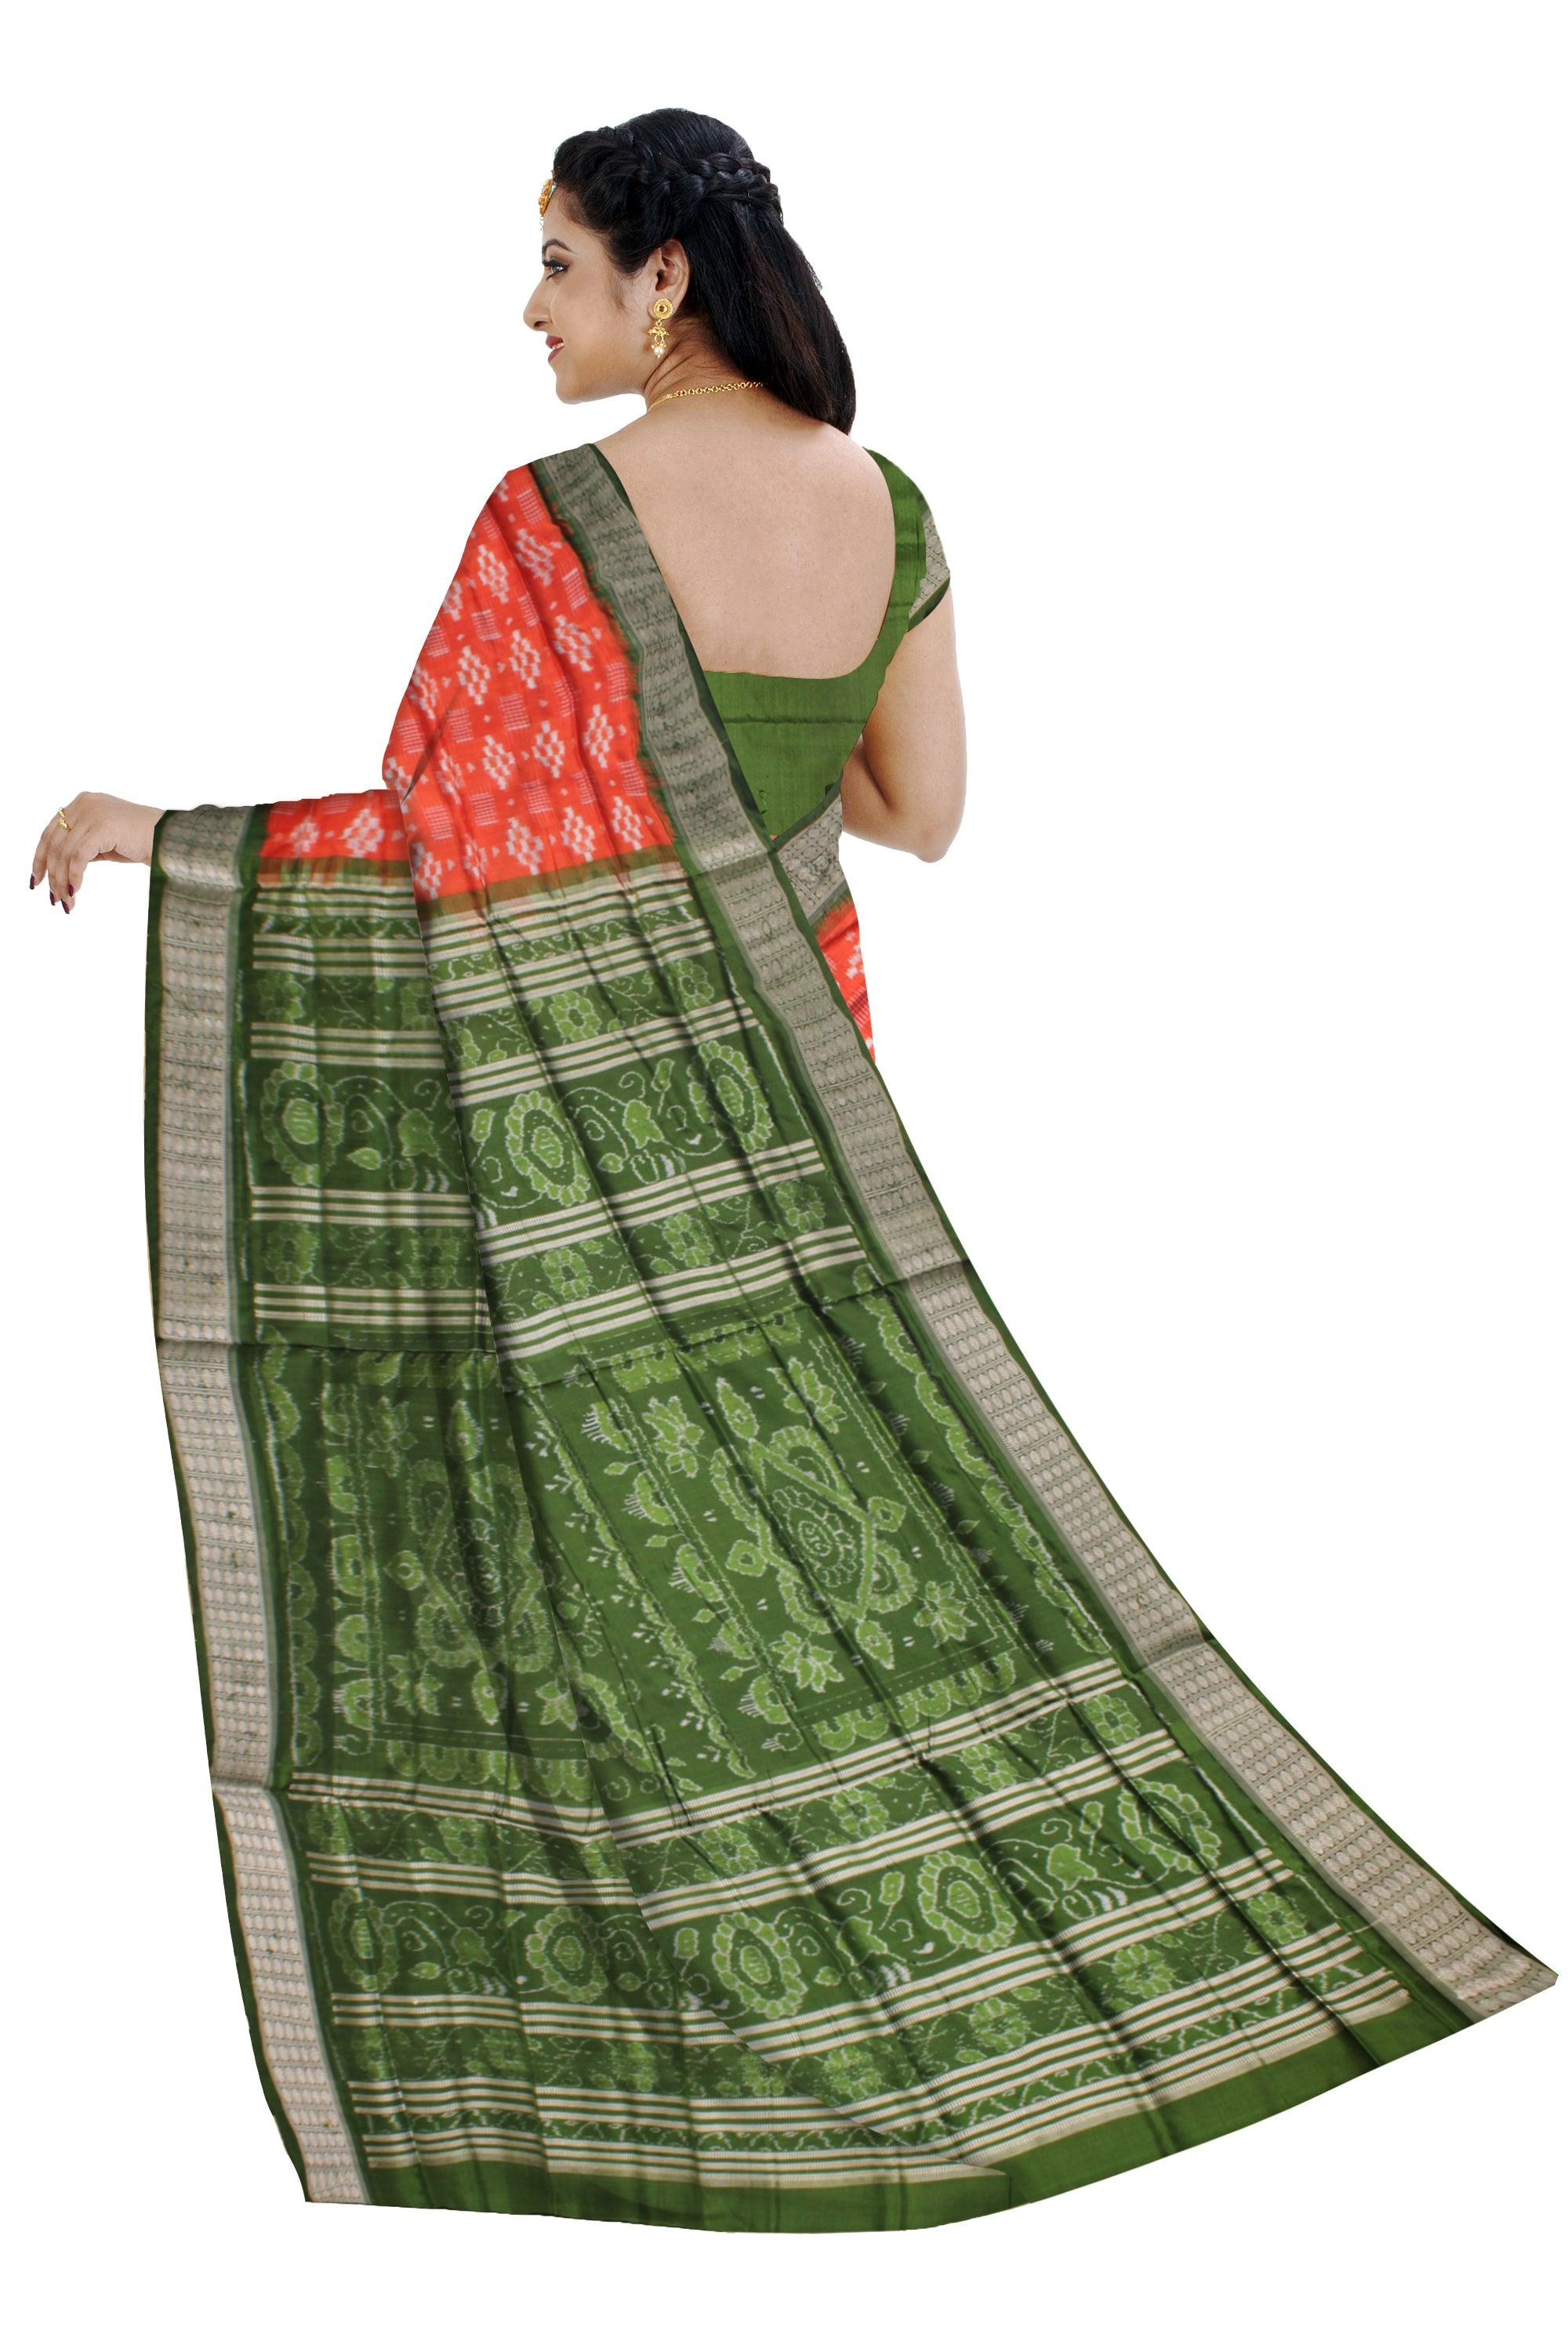 MARRAIGE COLLECTION PURE PASAPALI PATA SAREE IS ORANGE AND GREEN COLOR BASE, COMES WITH MATCHING BLOUSE PIECE. - Koshali Arts & Crafts Enterprise